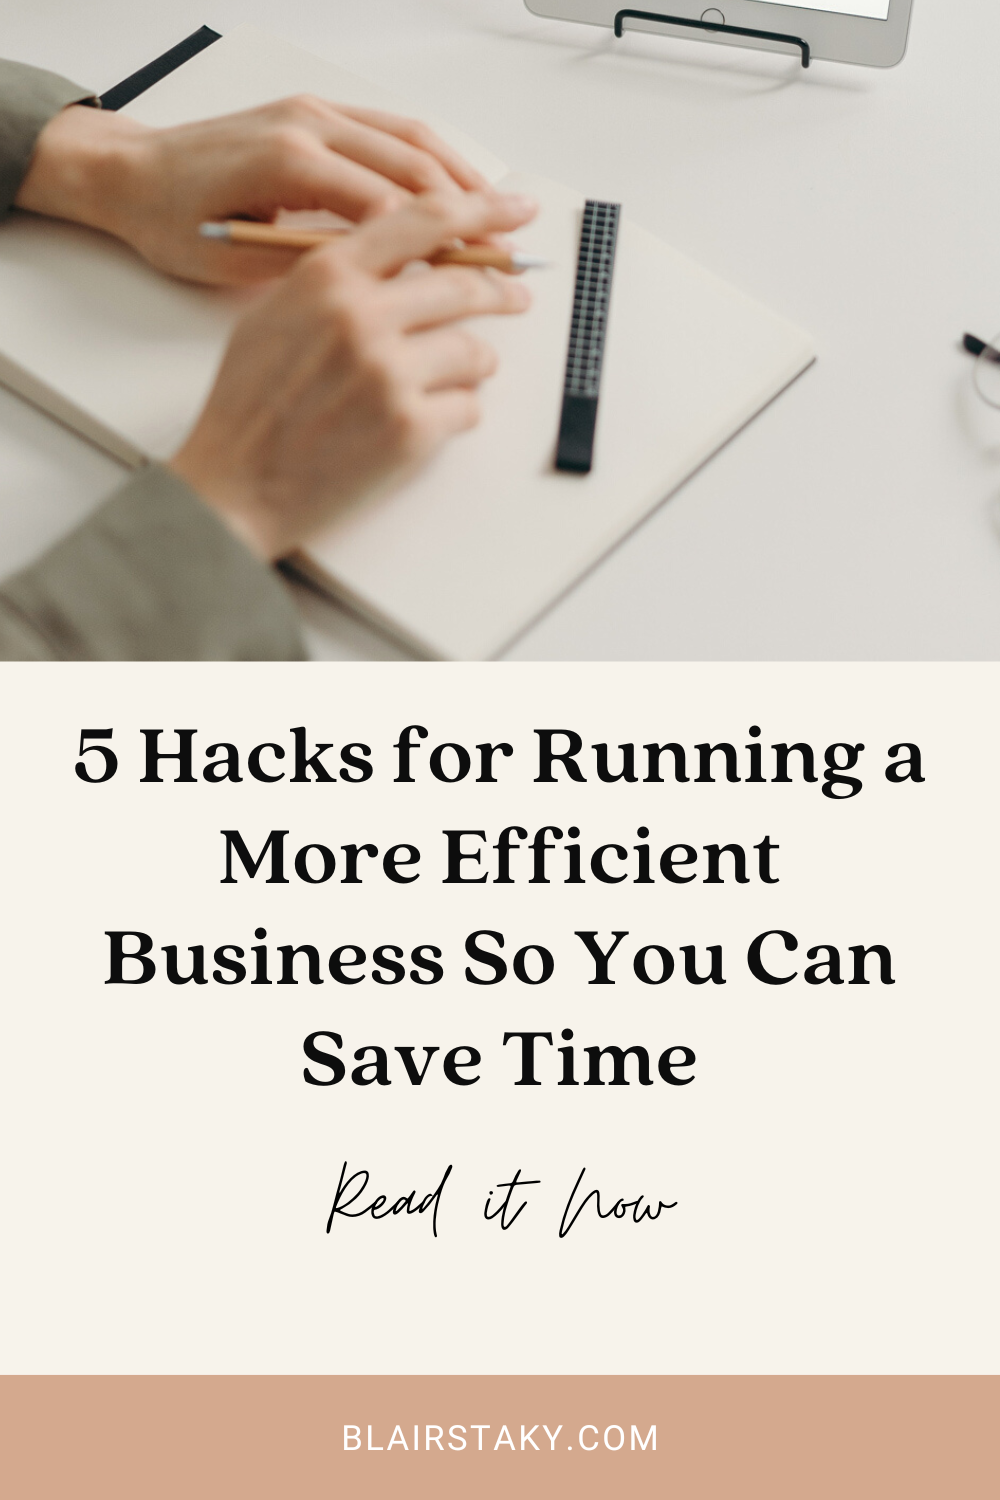 5 Hacks for Running a More efficient business so you can save time | BlairStaky.com